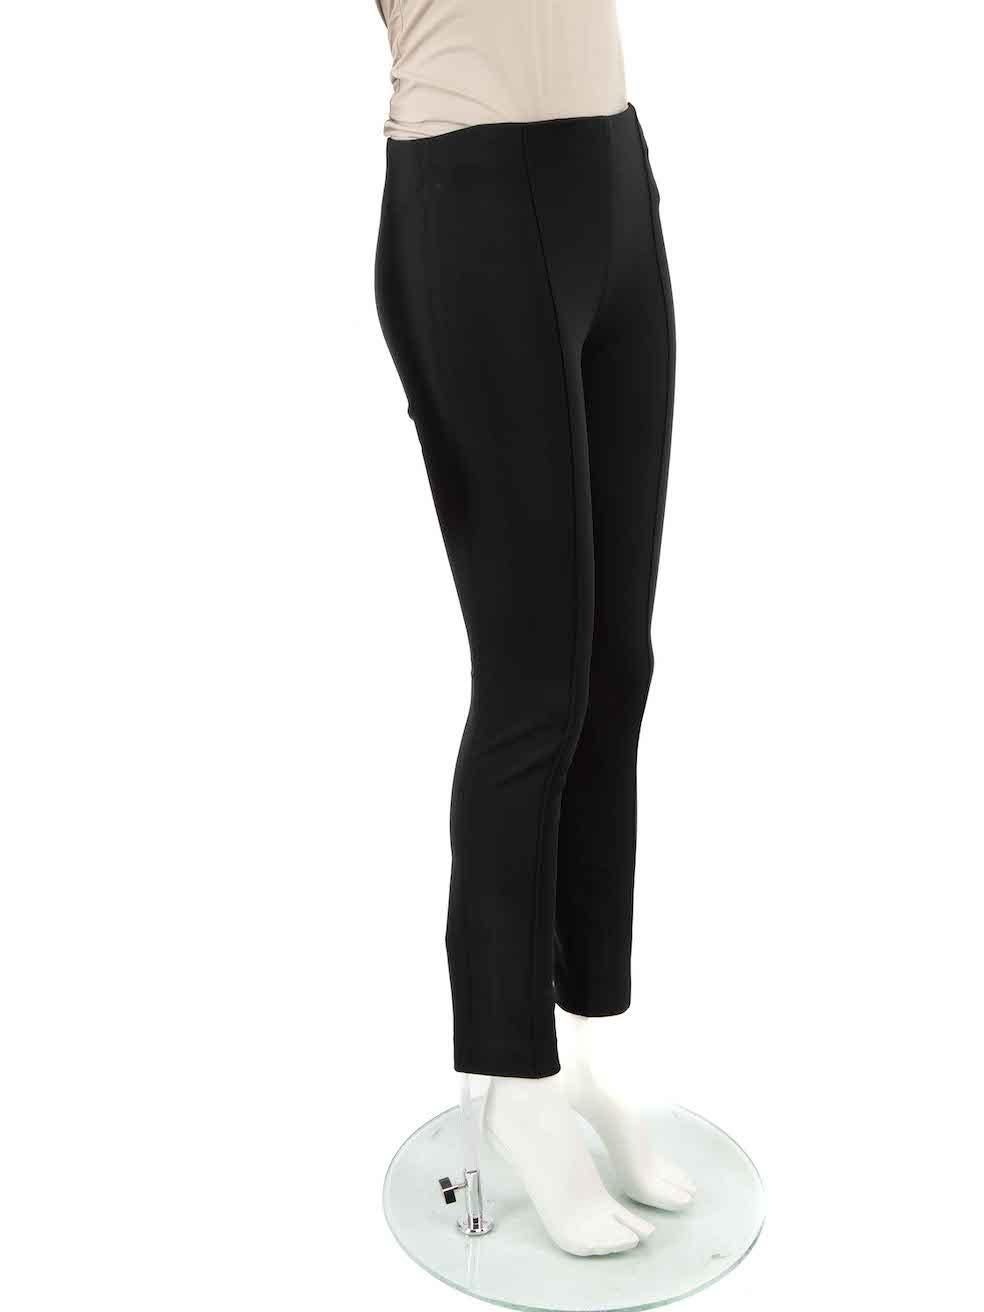 CONDITION is Good. Minor wear to leggings is evident. Light wear to the left centre front seam which has been partially re-stitched at the knee on this used The Row designer resale item.
 
 Details
 Black
 Viscose
 Leggings
 High rise
 Side zip